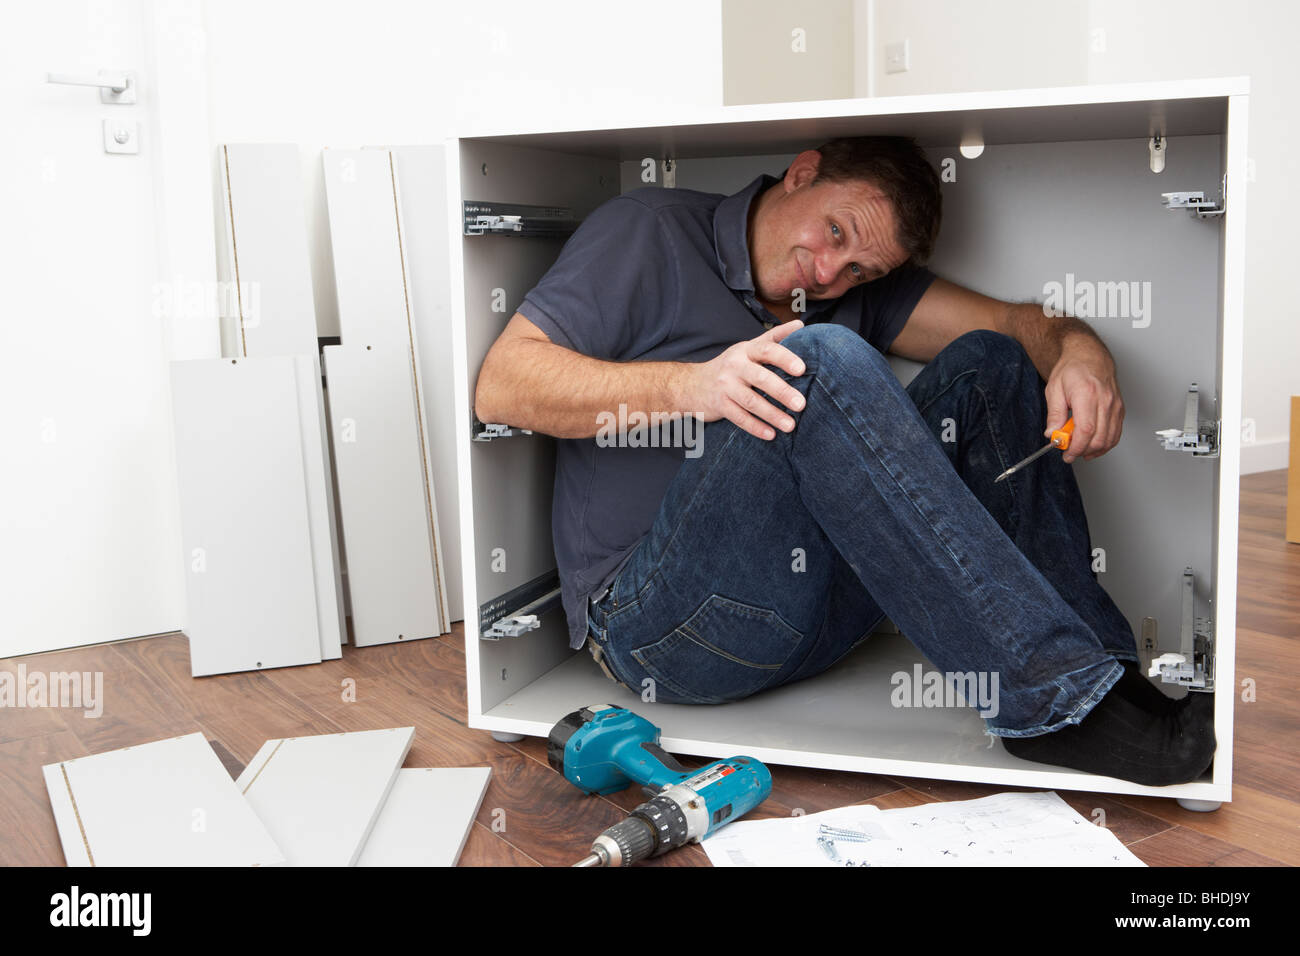 Man Trapped Whilst Assembling Flat Pack Furniture Stock Photo